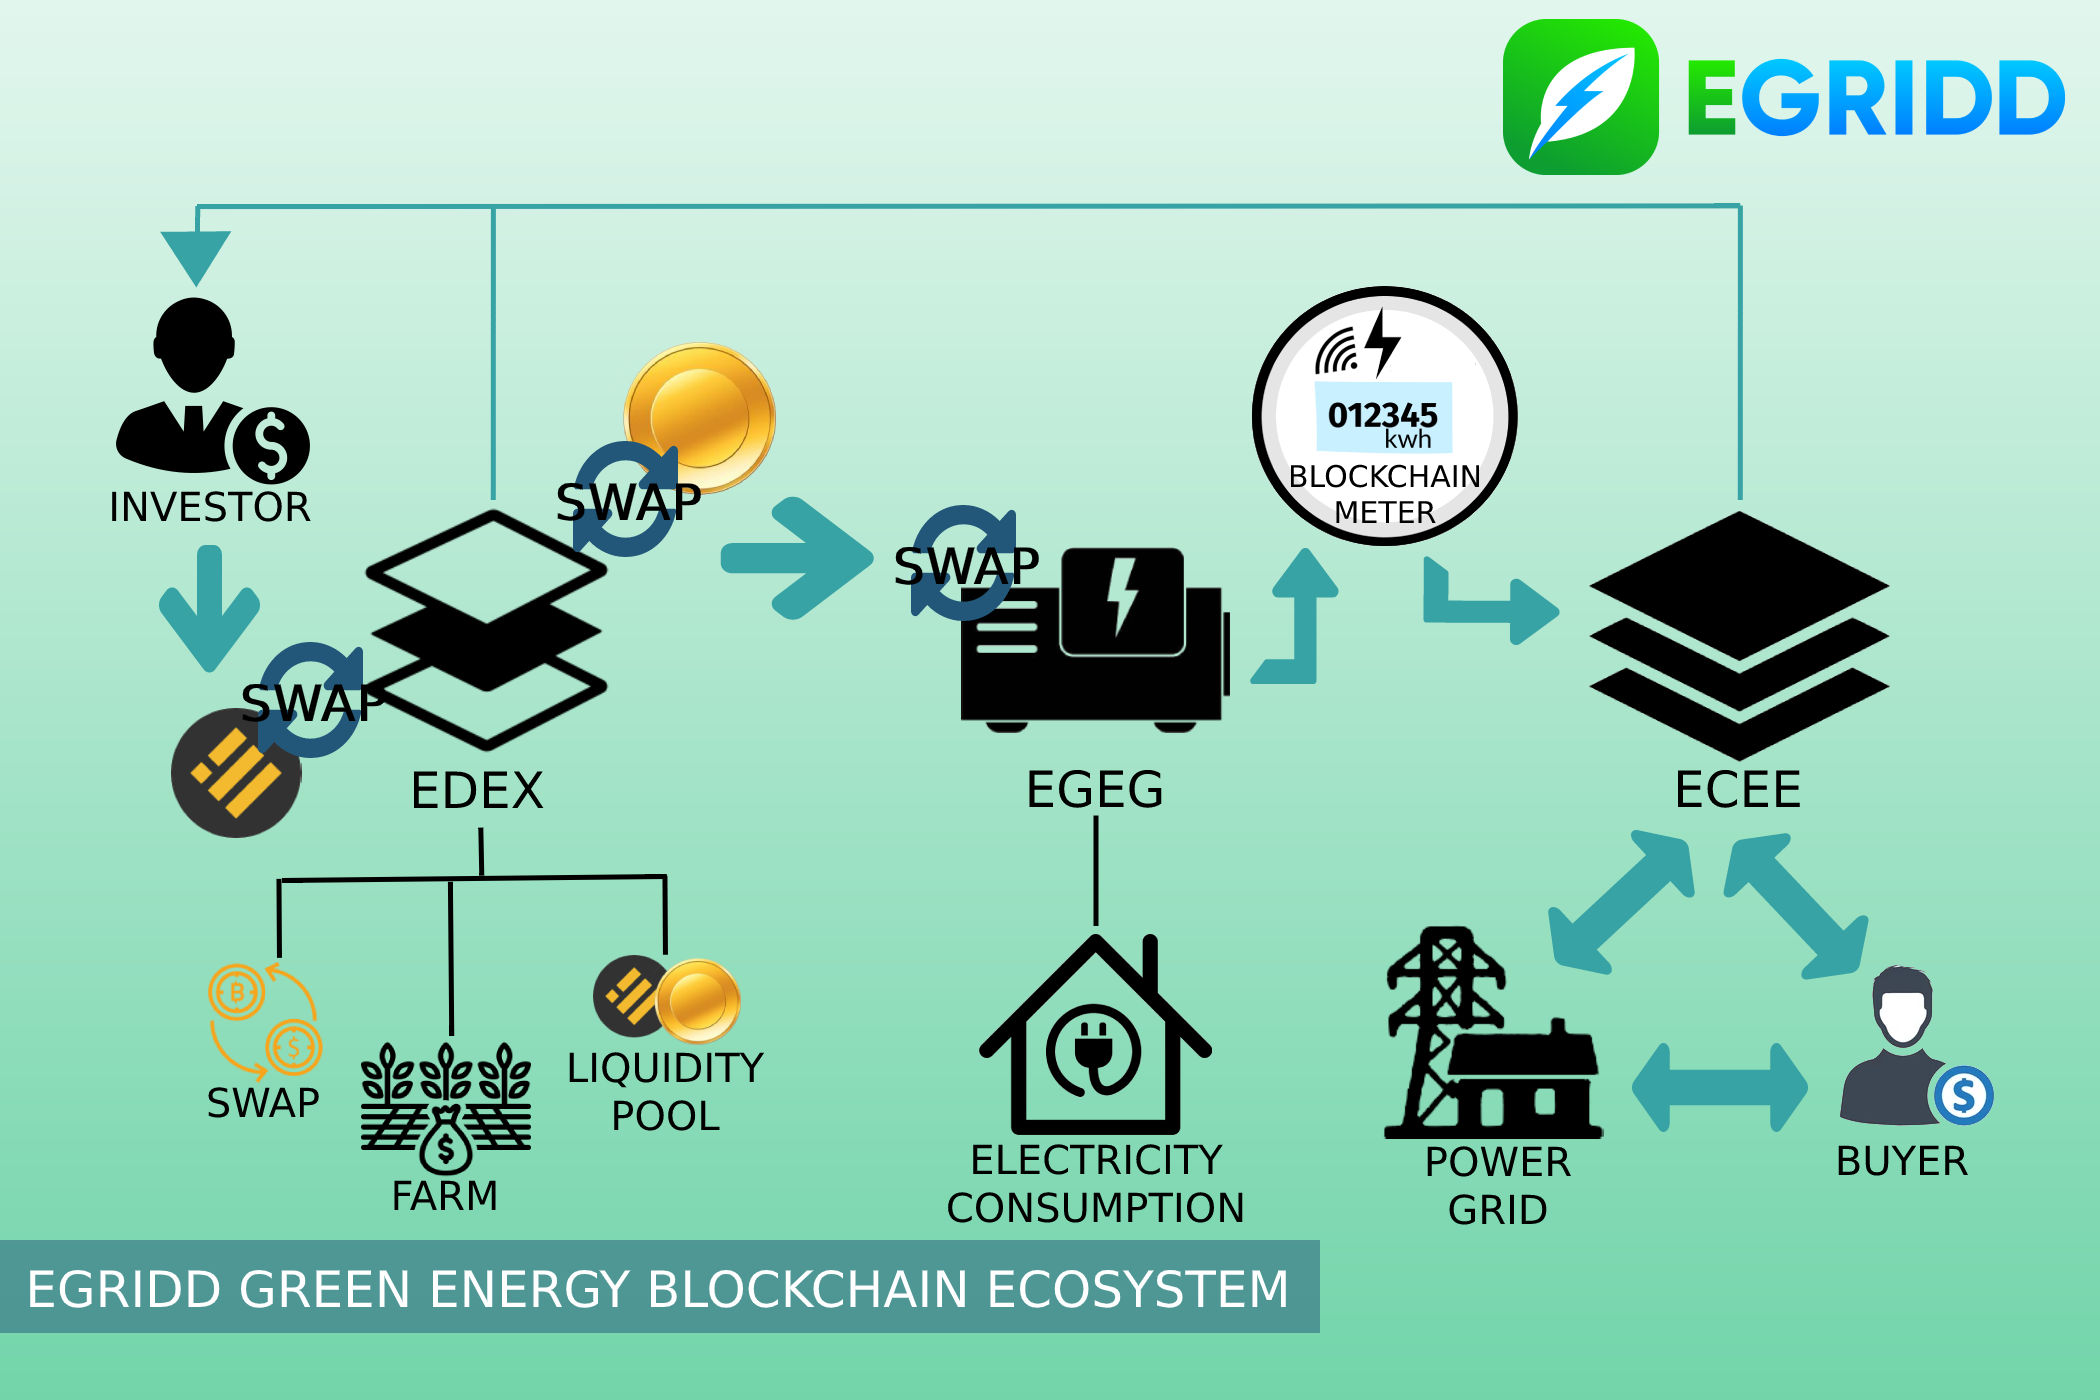 Transforming Decentralized Renewable Energy with Blockchain